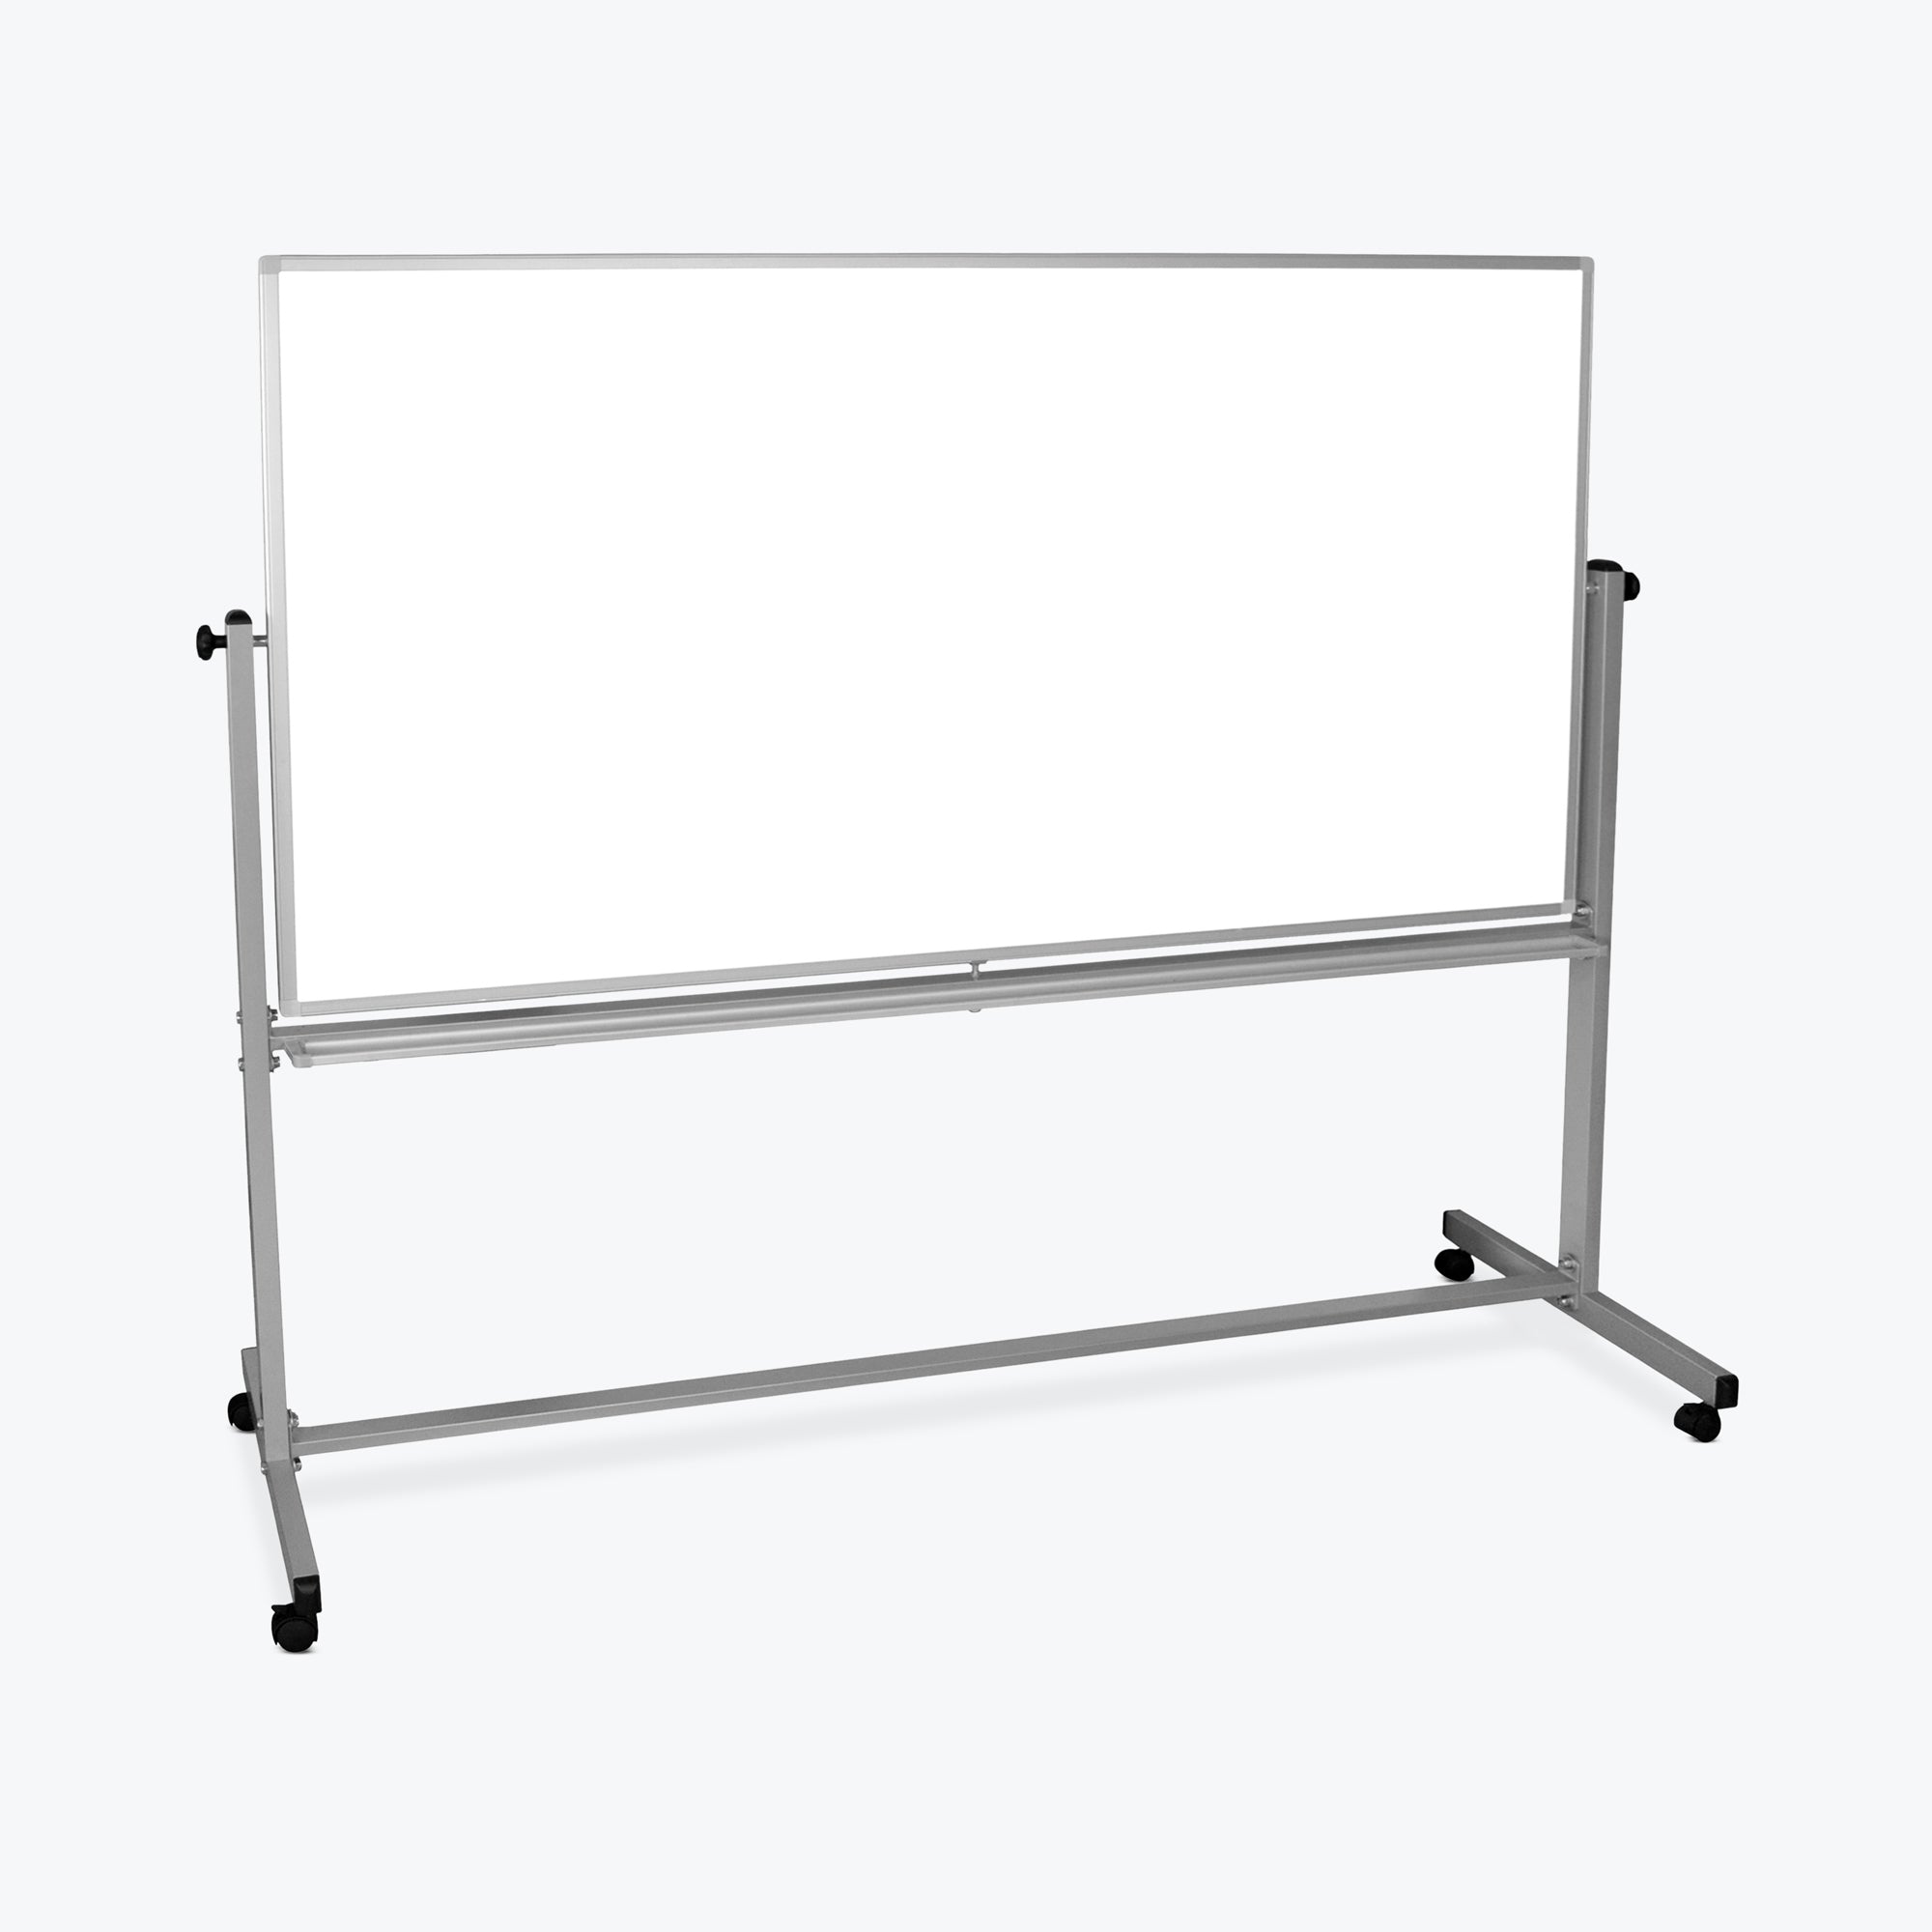 Luxor 72" x 40" Reversible Magnetic Mobile Whiteboard 74.5"W x 23"D x 69"H (Silver/White) - MB7240WW